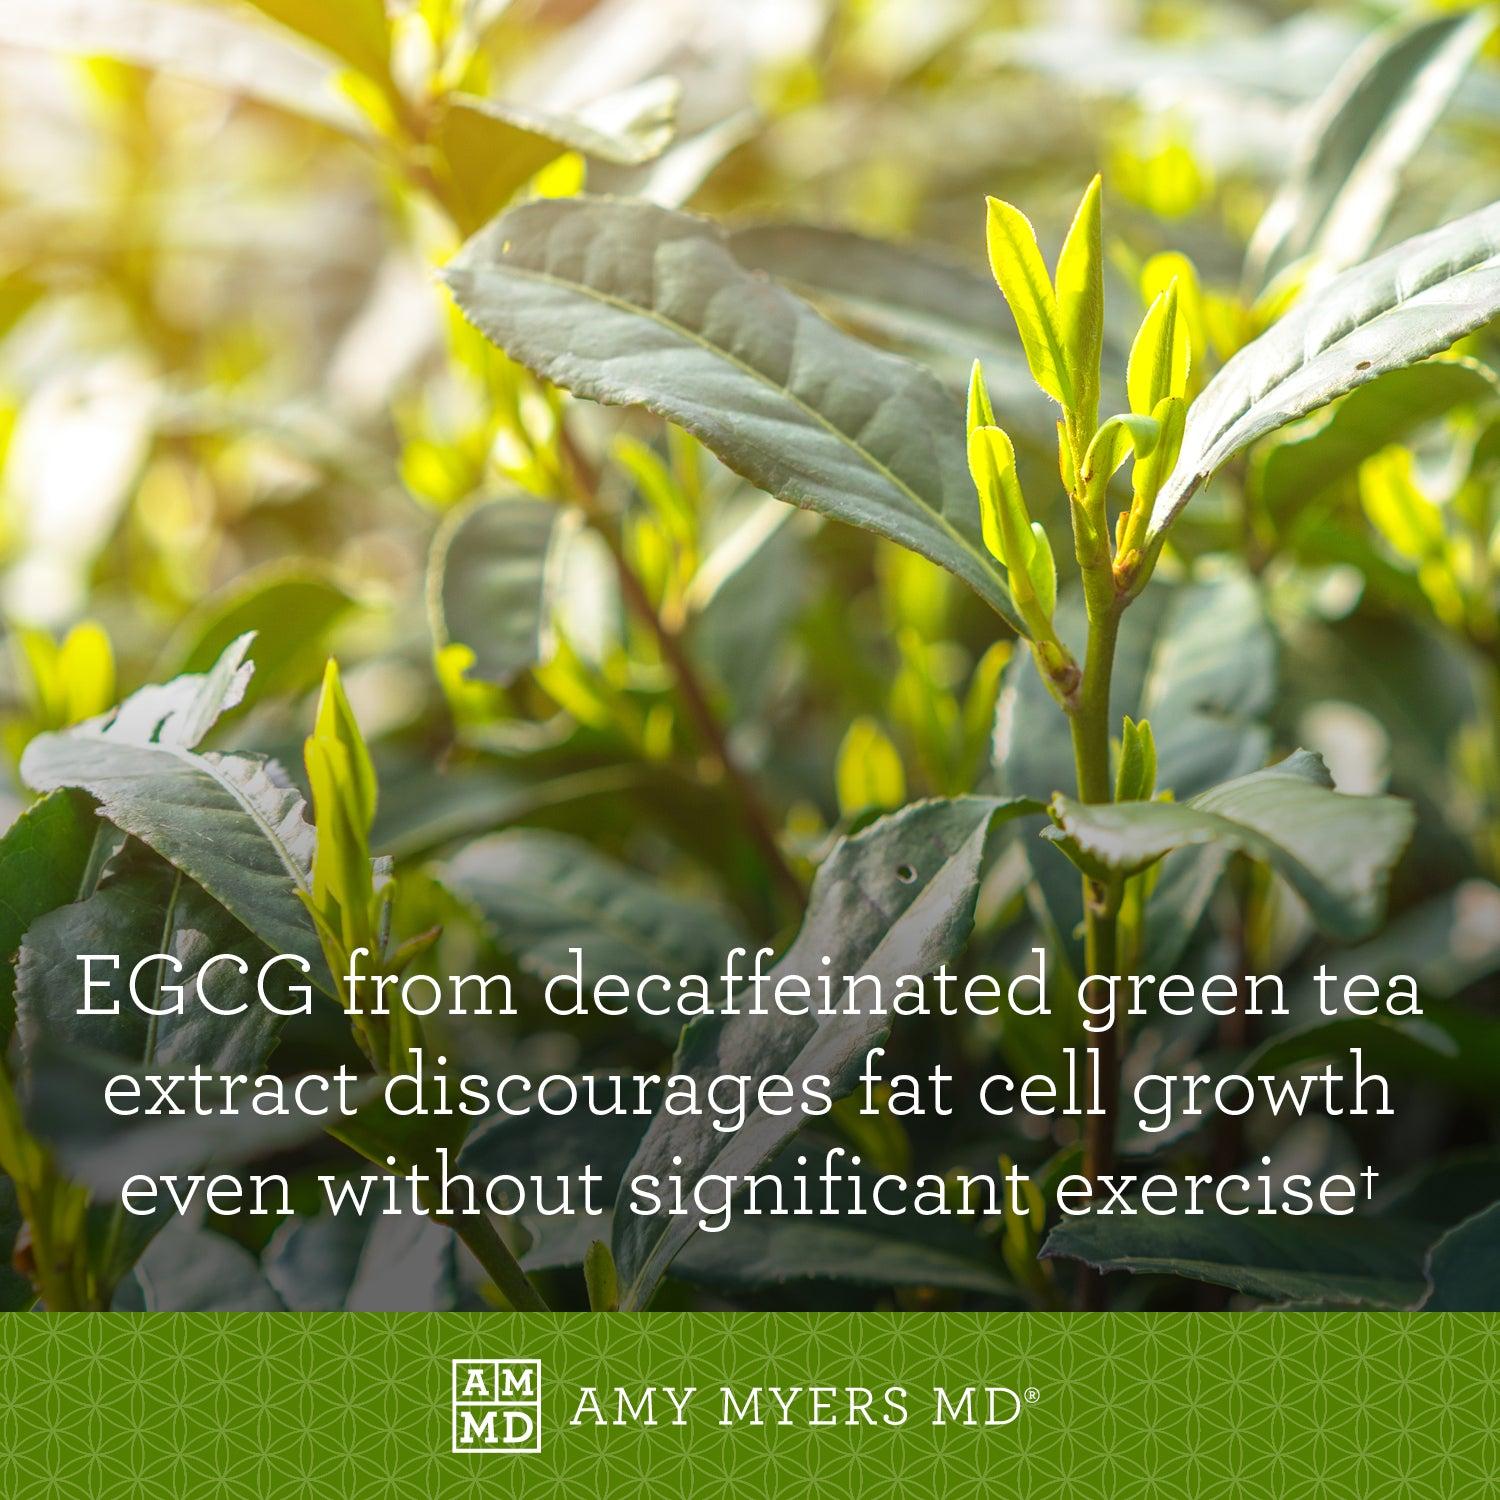 Green Tea Plants - EGCG from decaffeinated Green Tea discourages fat cell growth even without significant exercise - Amy Myers MD®